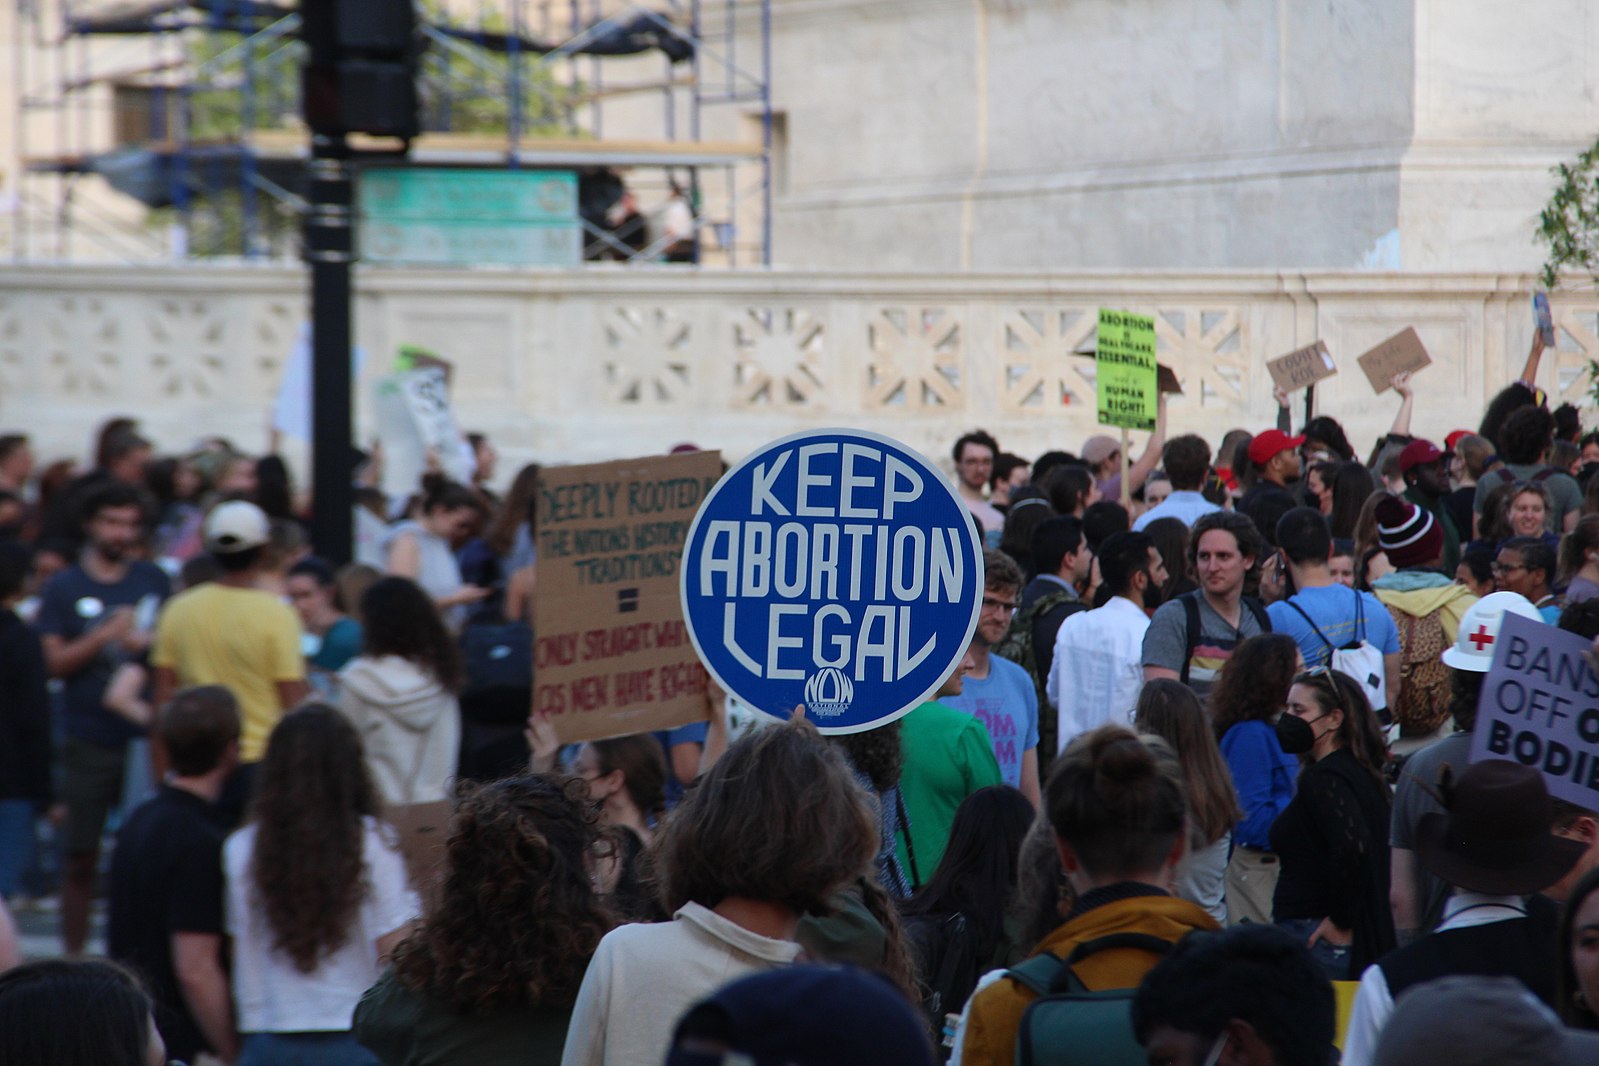 US Supreme Court again temporarily extends availability of abortion drug mifepristone